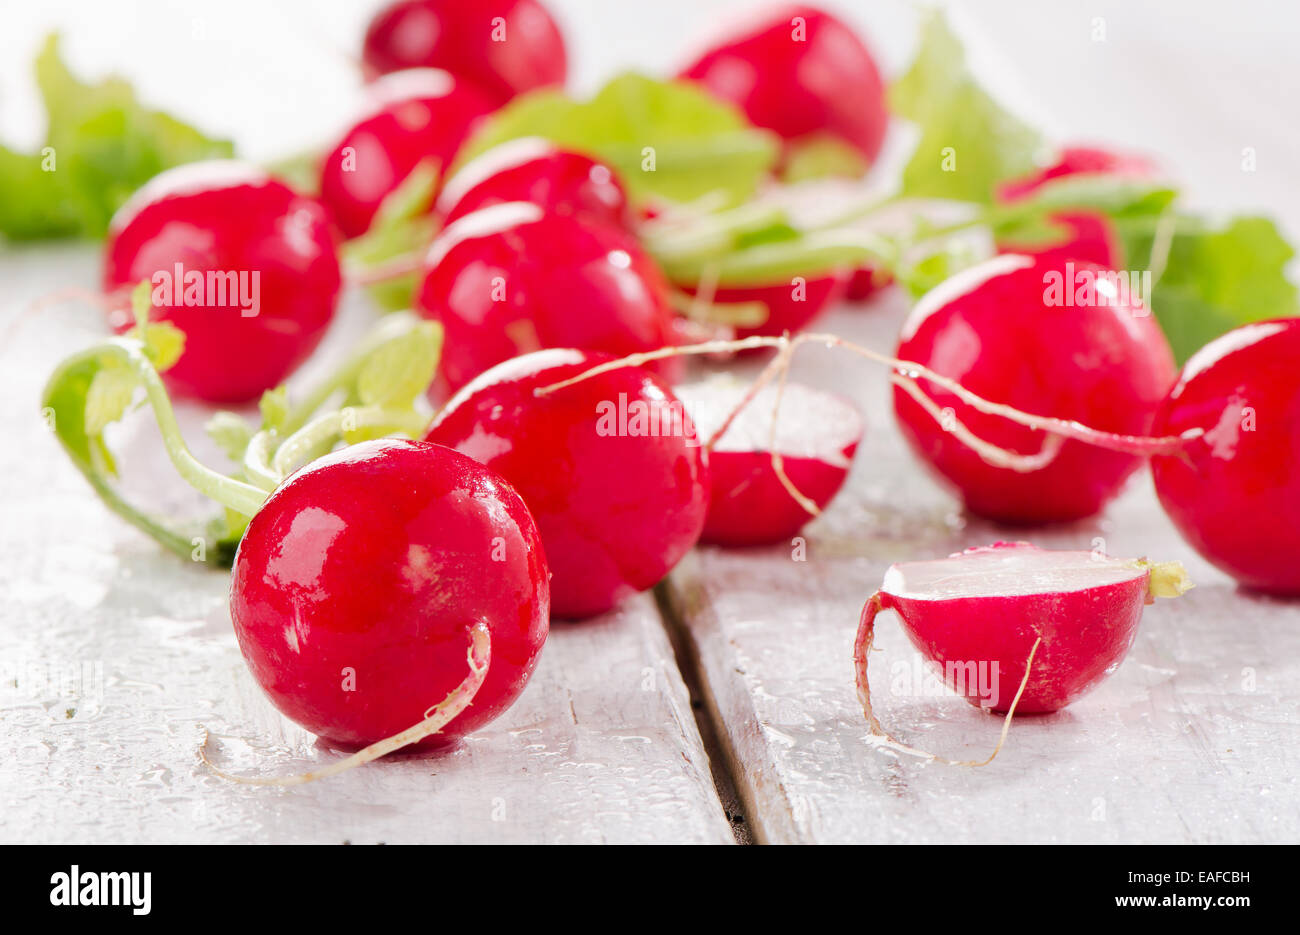 fresh radish on a wooden table. Selective focus Stock Photo